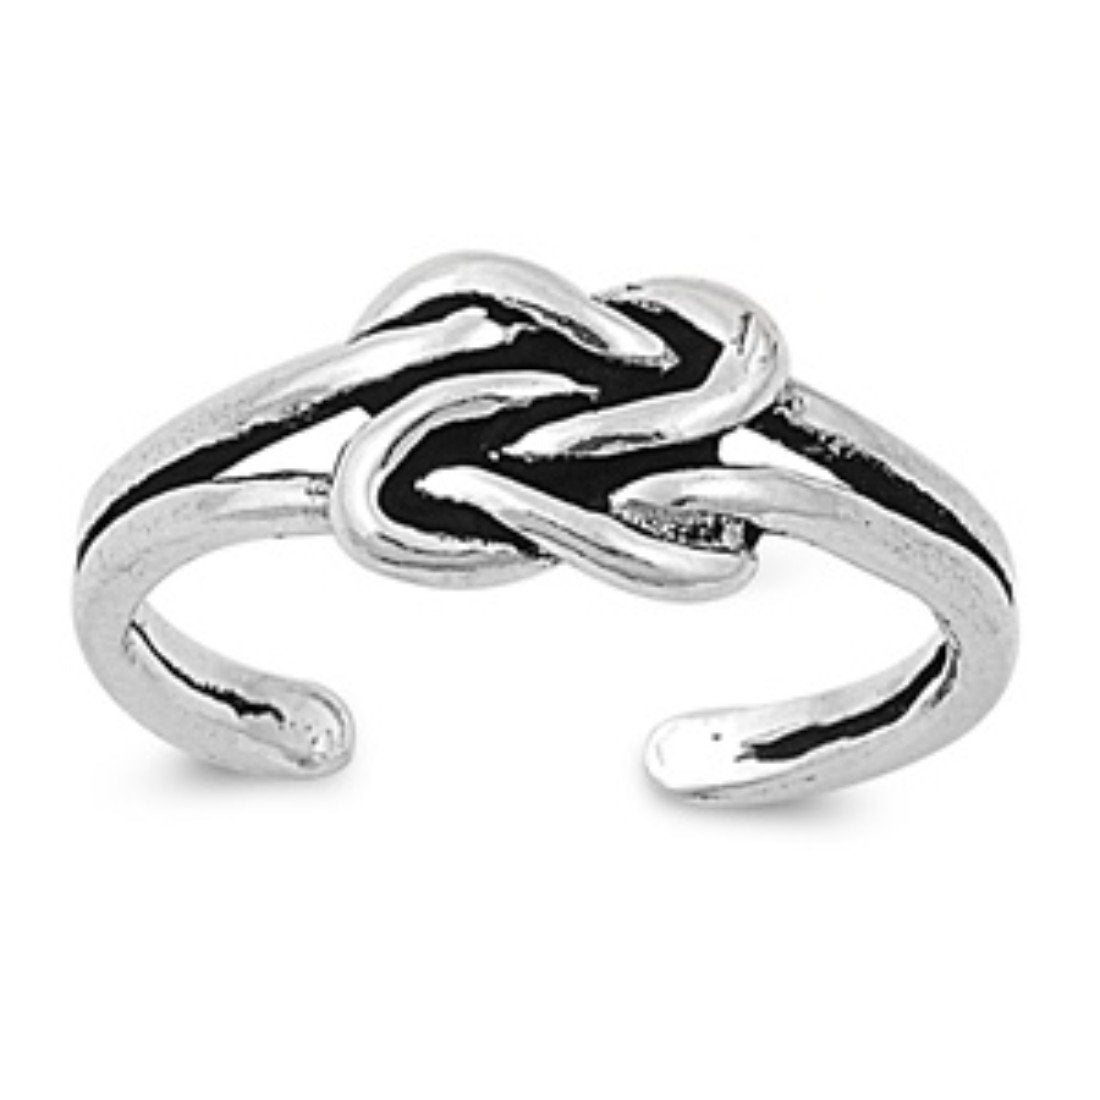 Adjustable Silver Toe Ring Band 925 Sterling Silver (6mm)